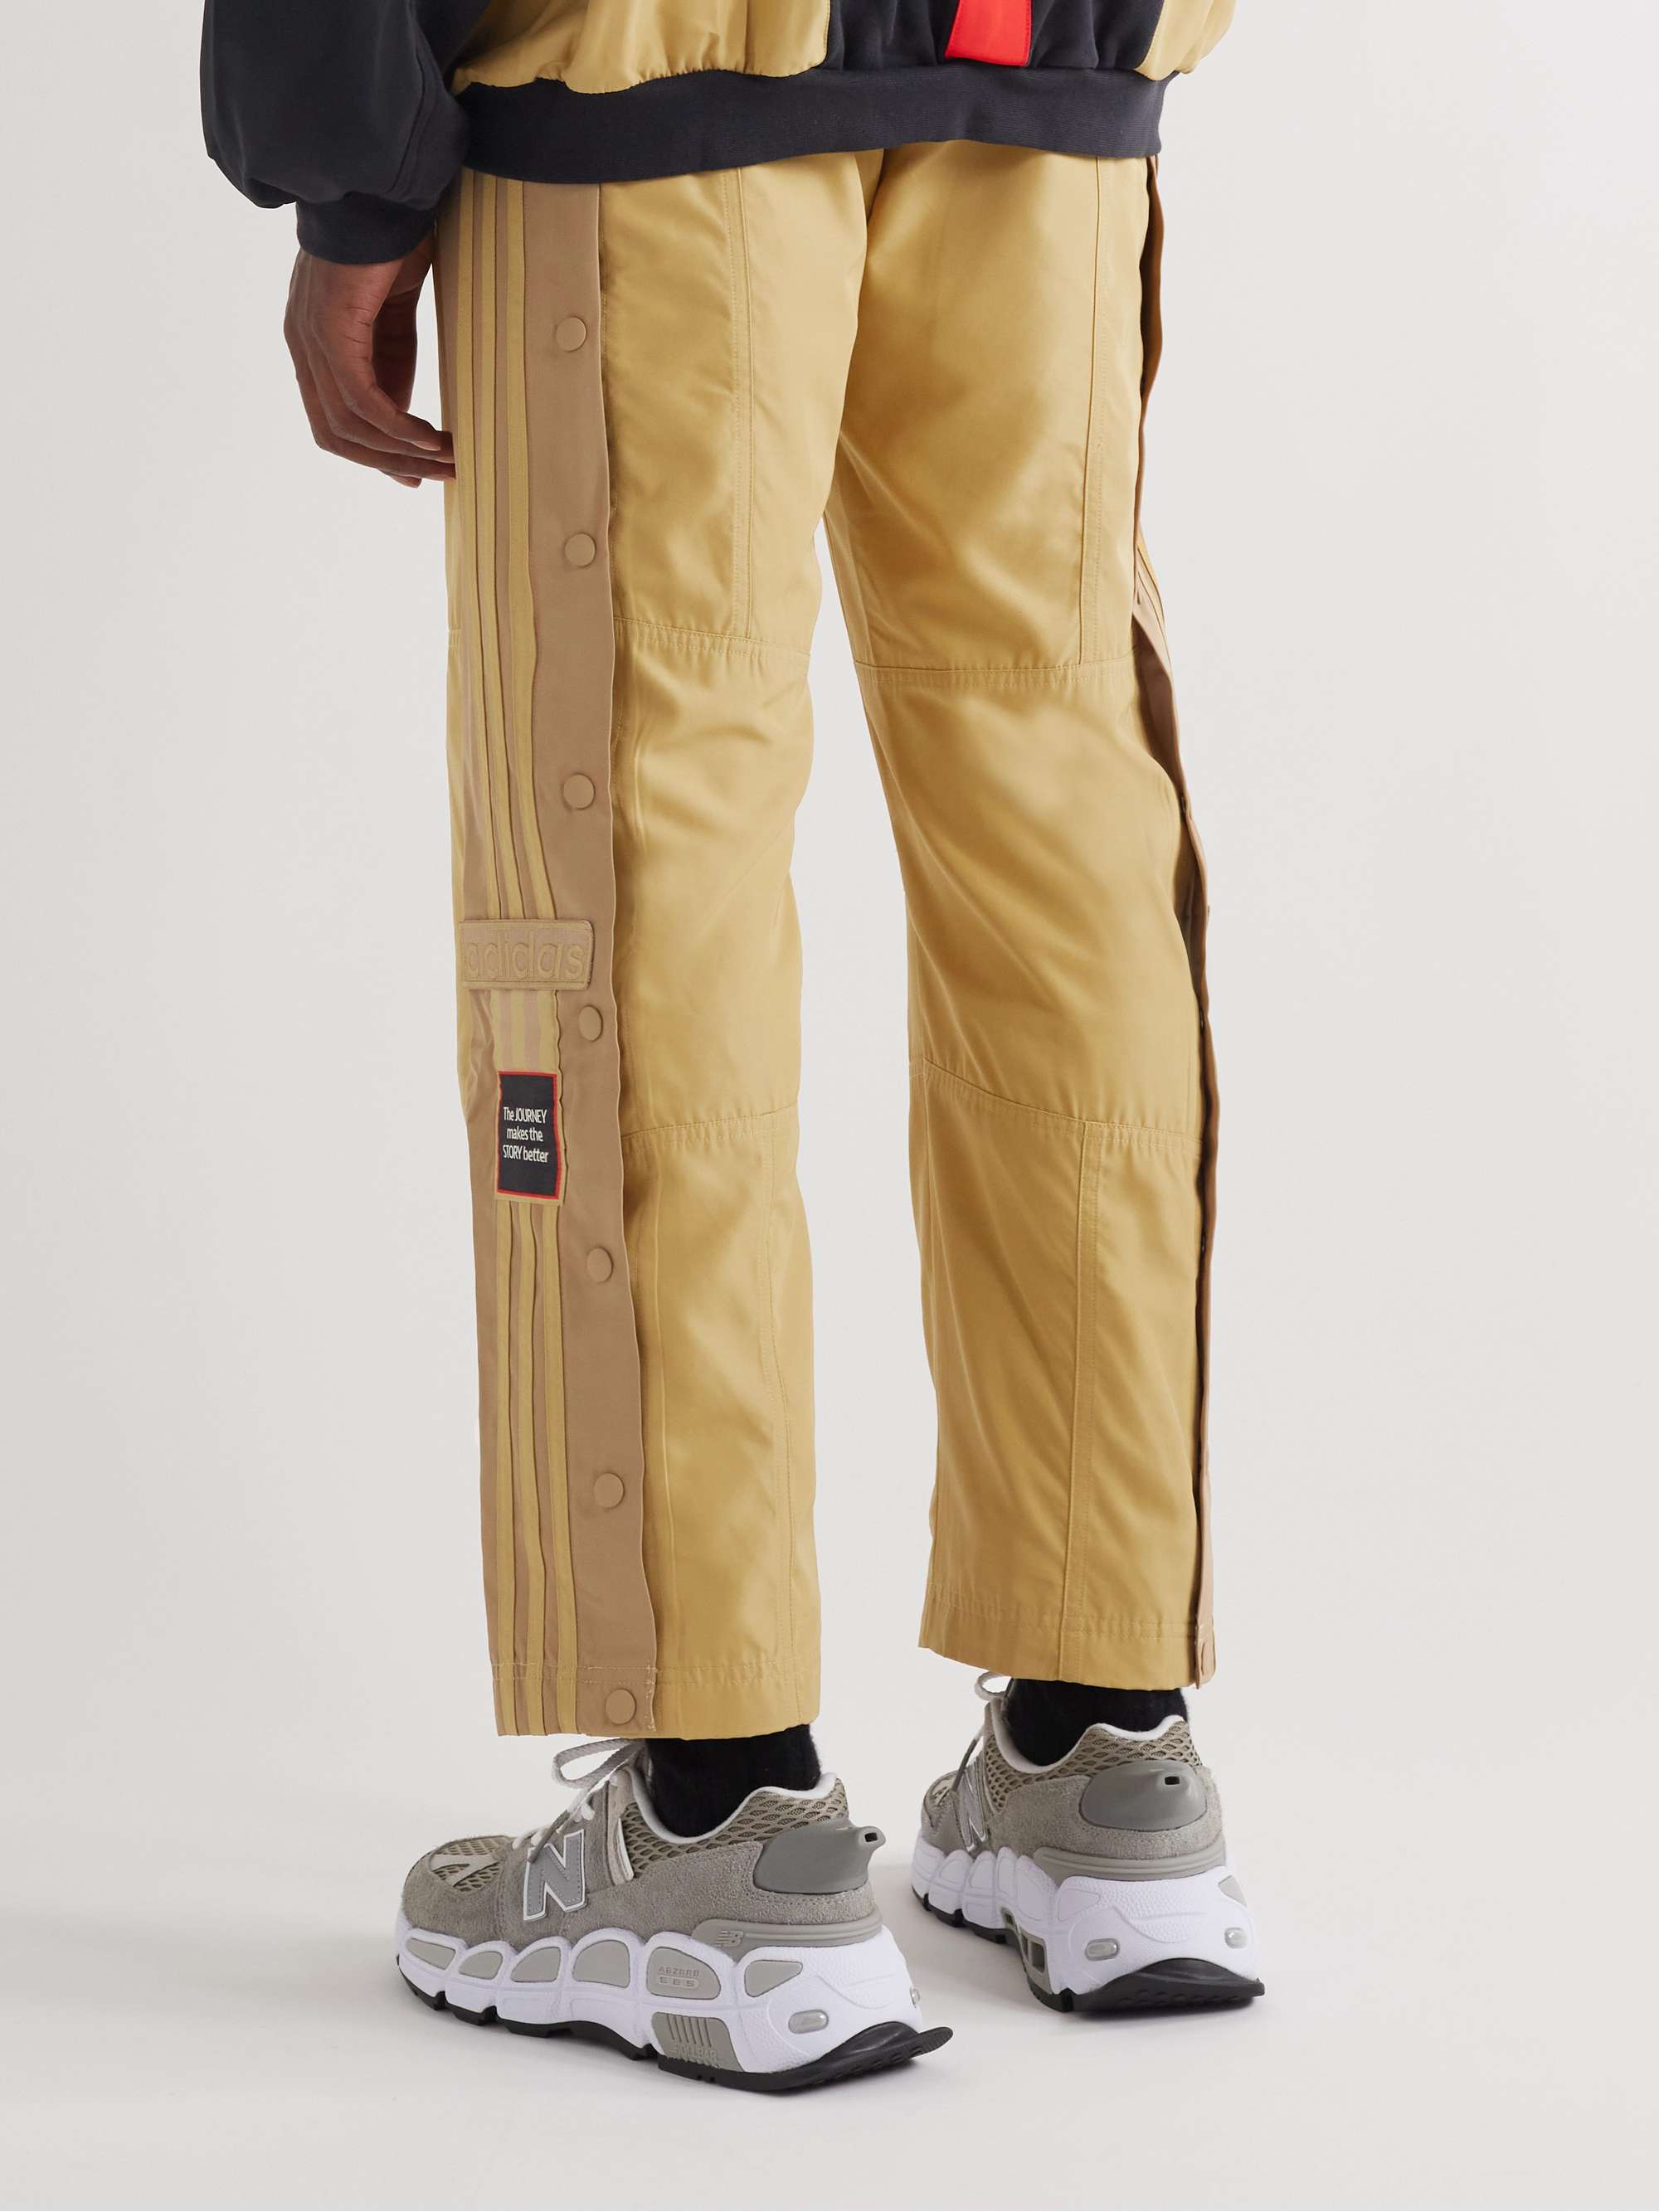 ADIDAS CONSORTIUM + Midwest Kids Striped Panelled Recycled Canvas Track Pants